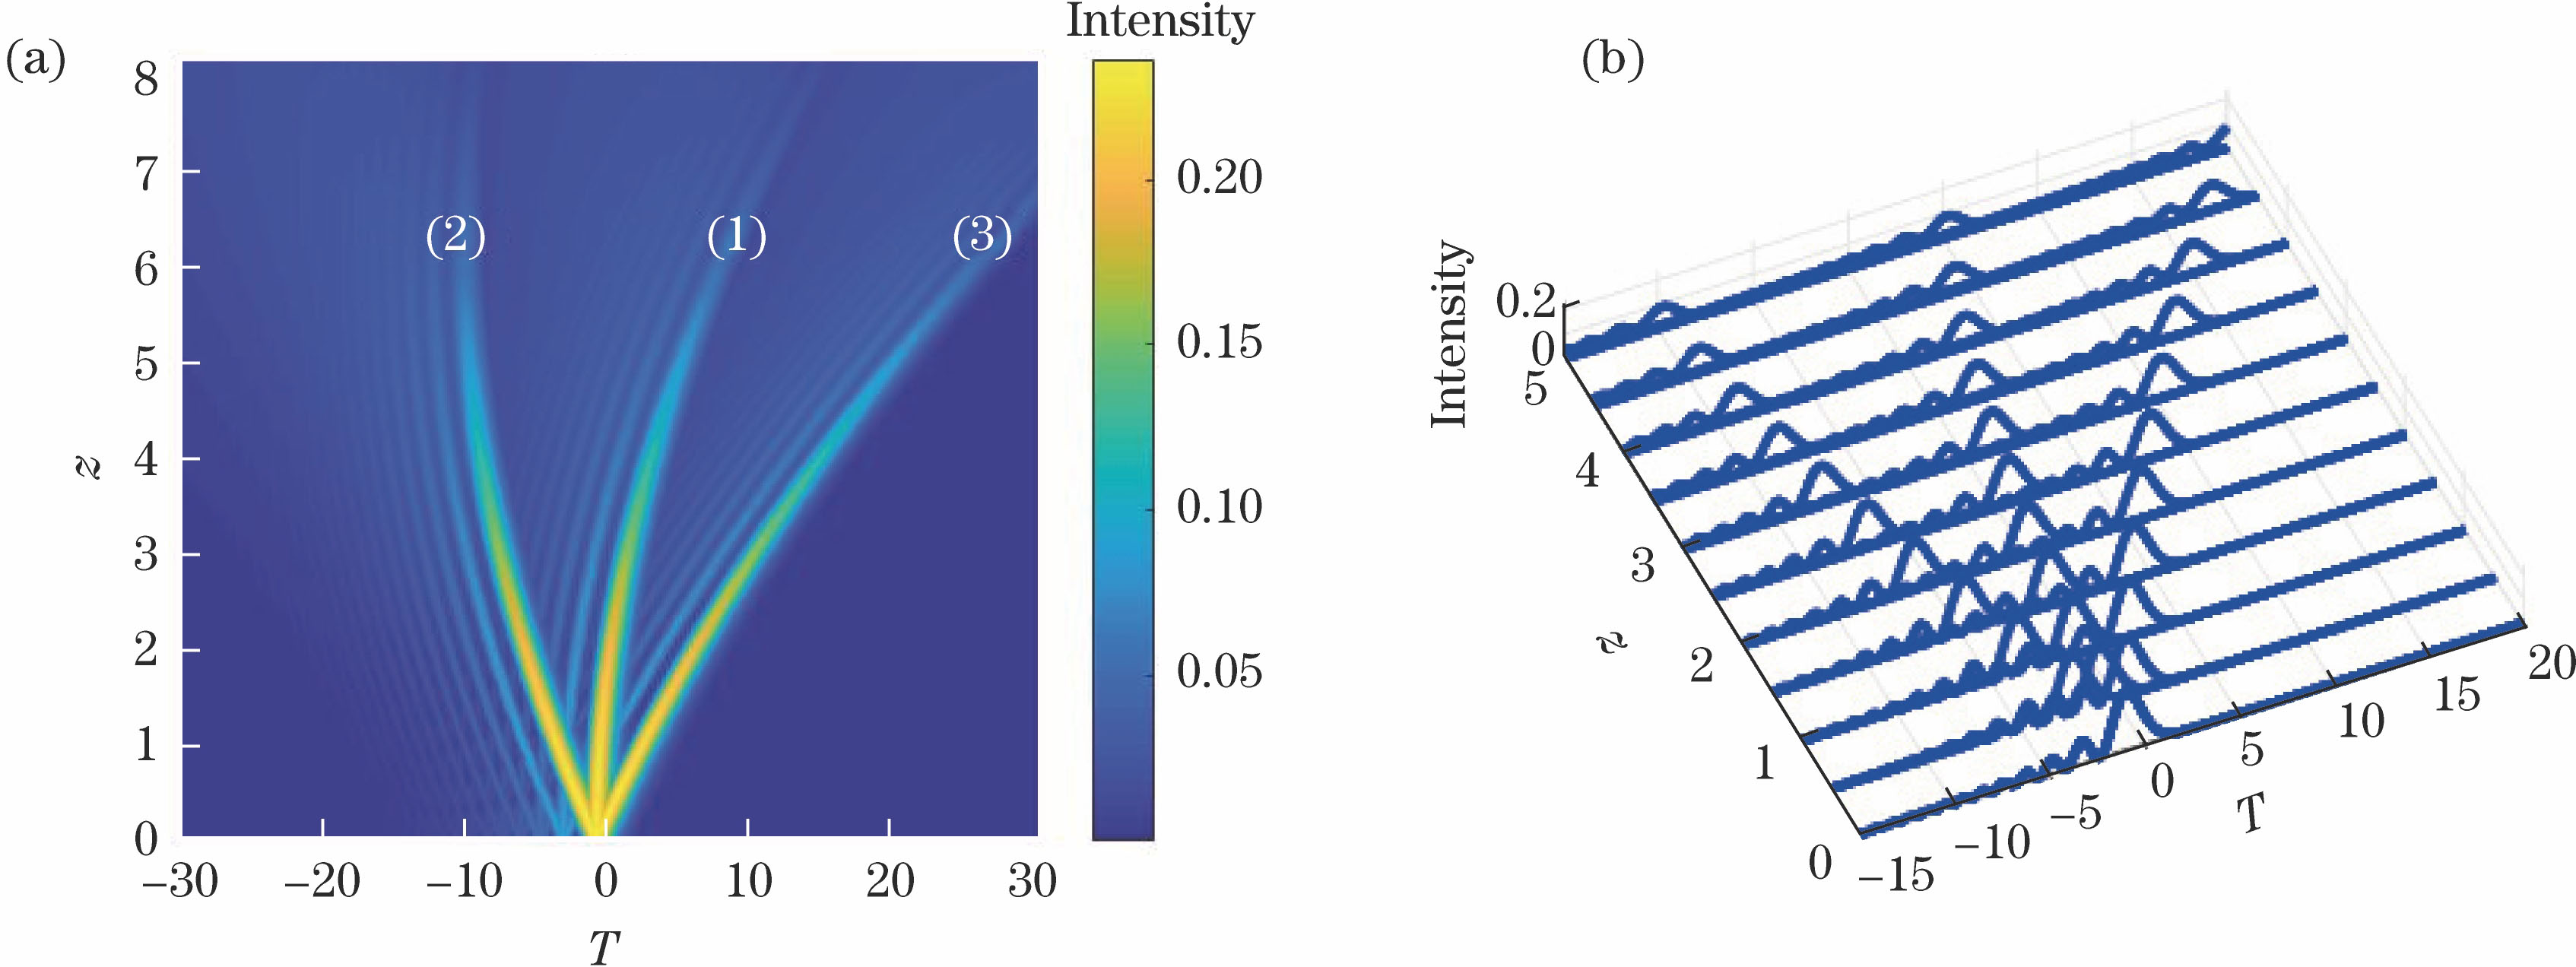 Transmission evolution diagram of oblique incidence Airy beam. (a) Transmission process of finite-energy Airy beams with different initial velocities; (b) intensity distribution at different transmission distances